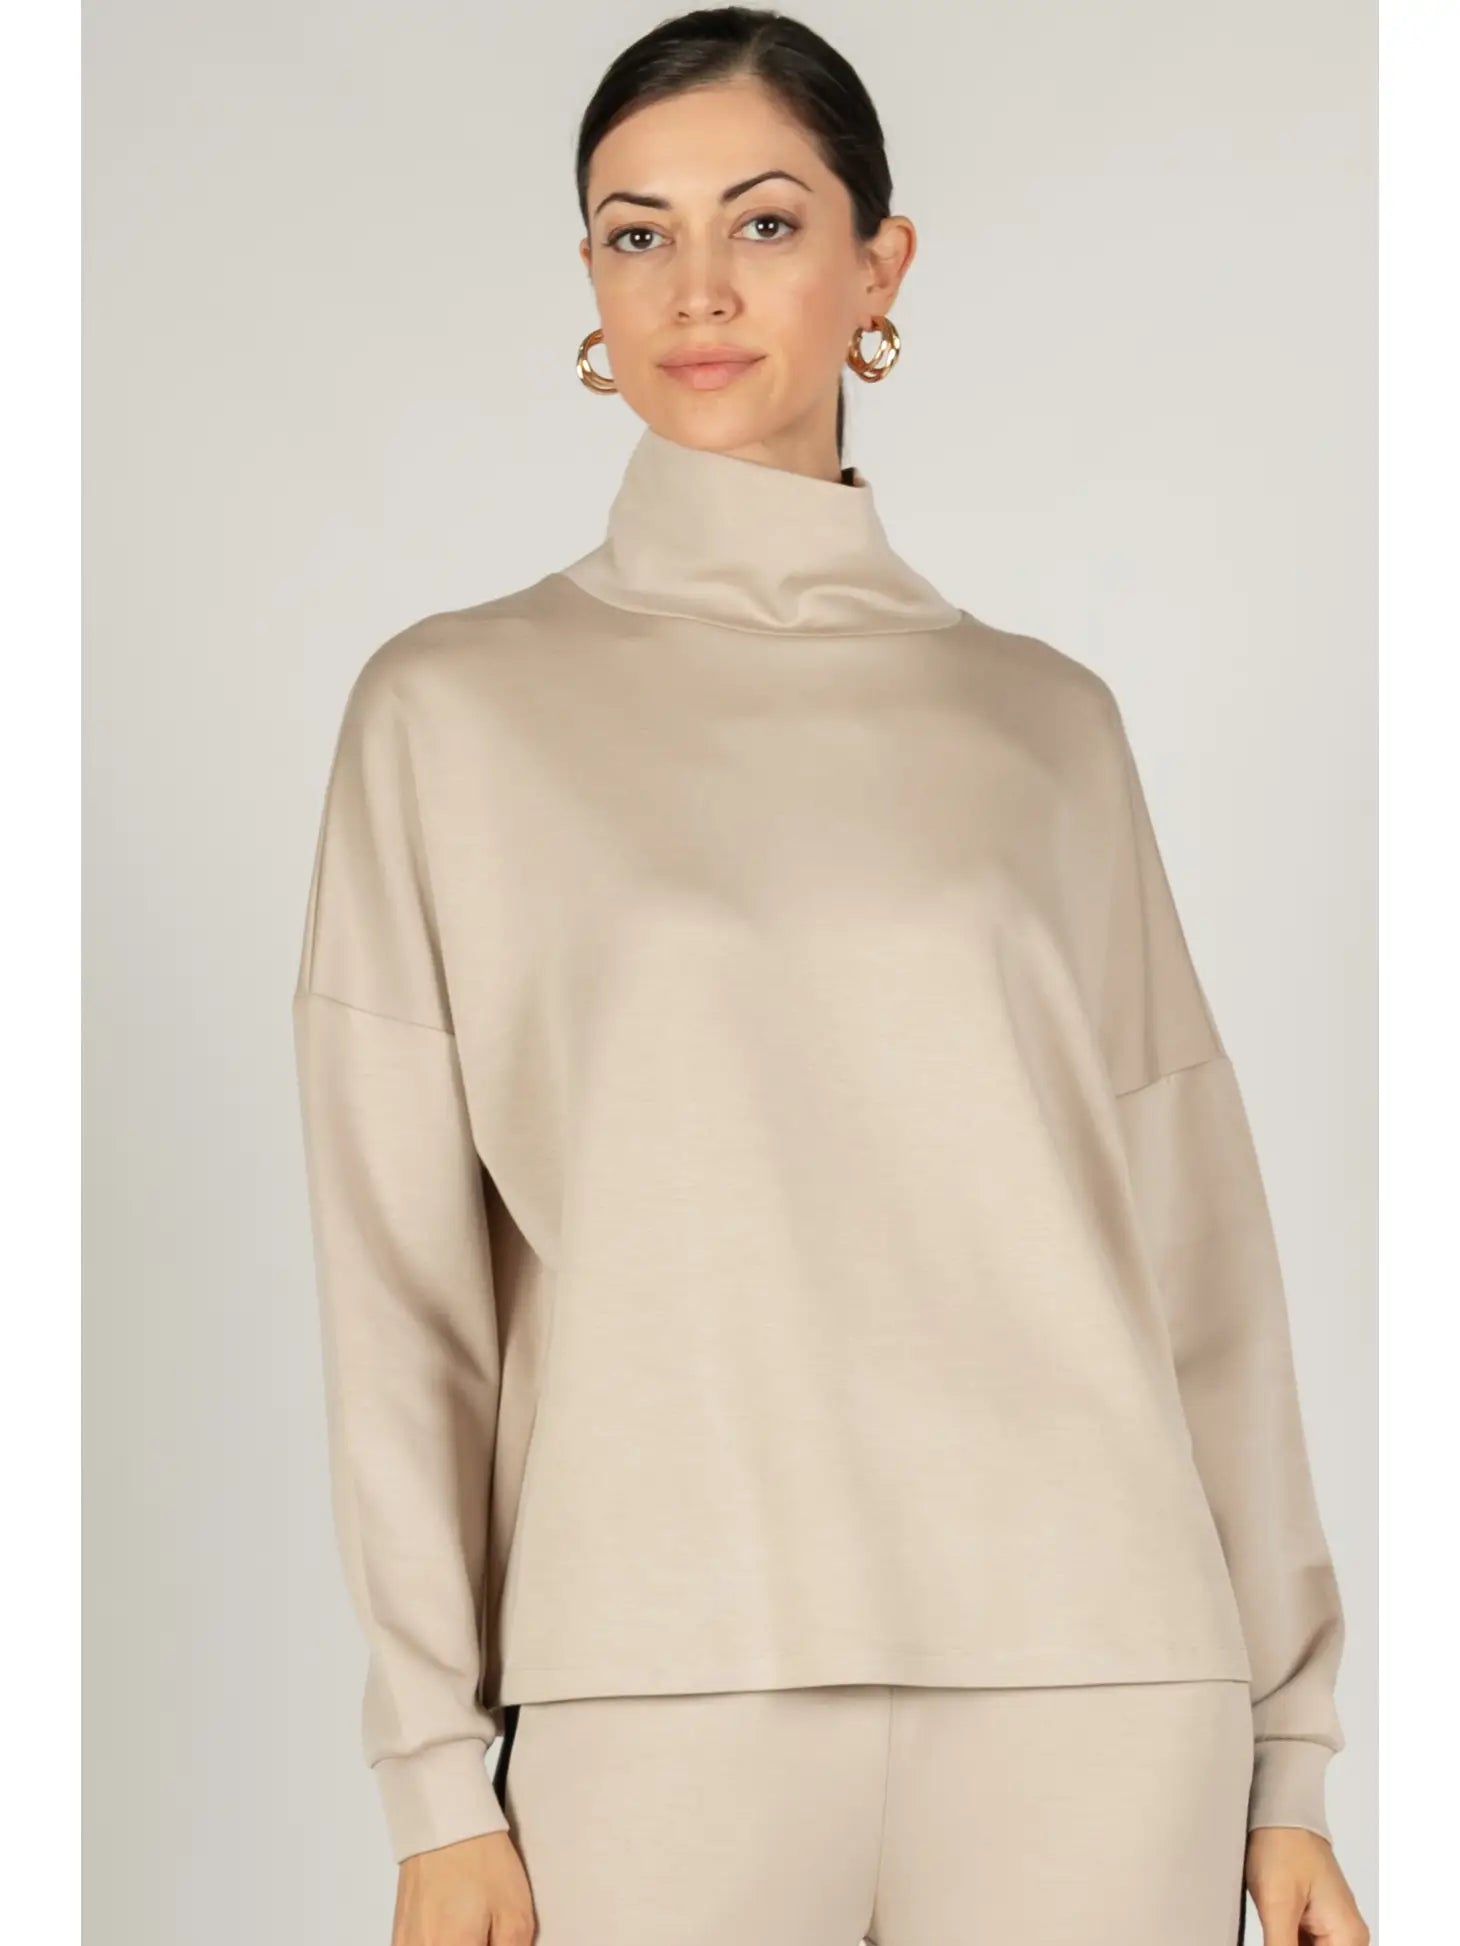 Butter Modal Cowl Neck Long Sleeve Top- Taupe